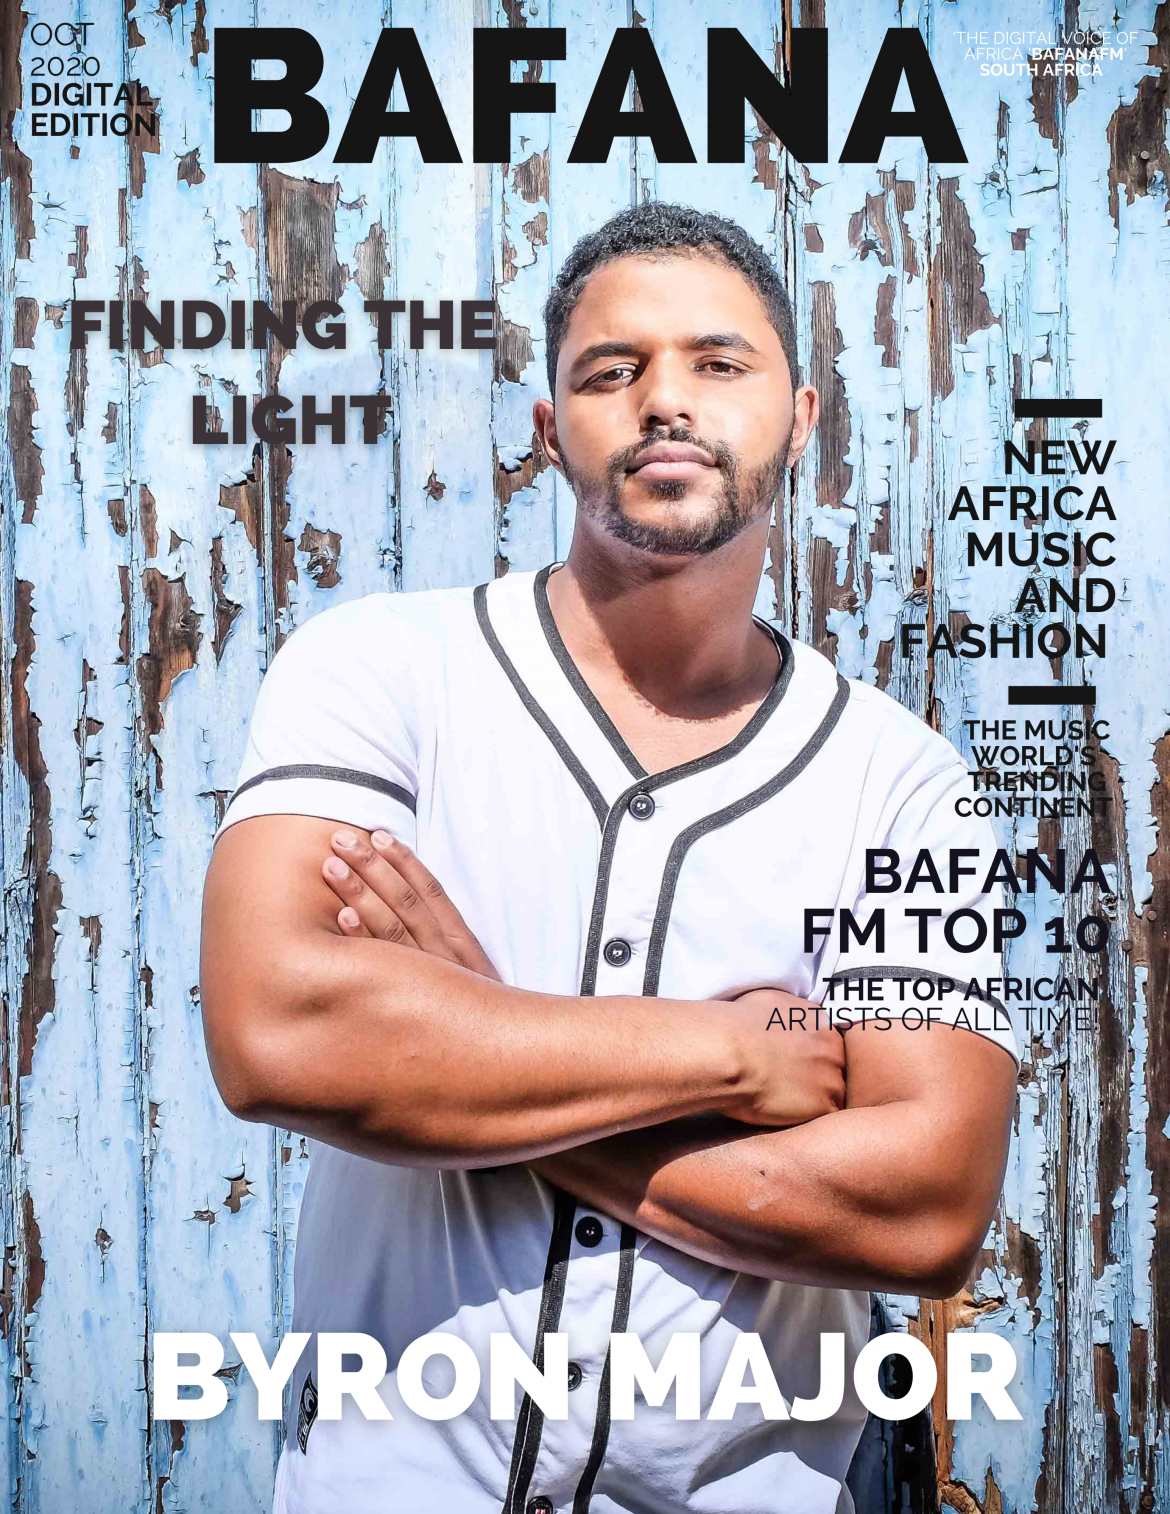 South Africa’s ‘Byron Major’ is ‘Finding the Light’ with International success as he releases a tearjerking, heart wrenching, classic piano ballad of ‘Stevie Wonder’ and ‘John Legend’ Proportions.